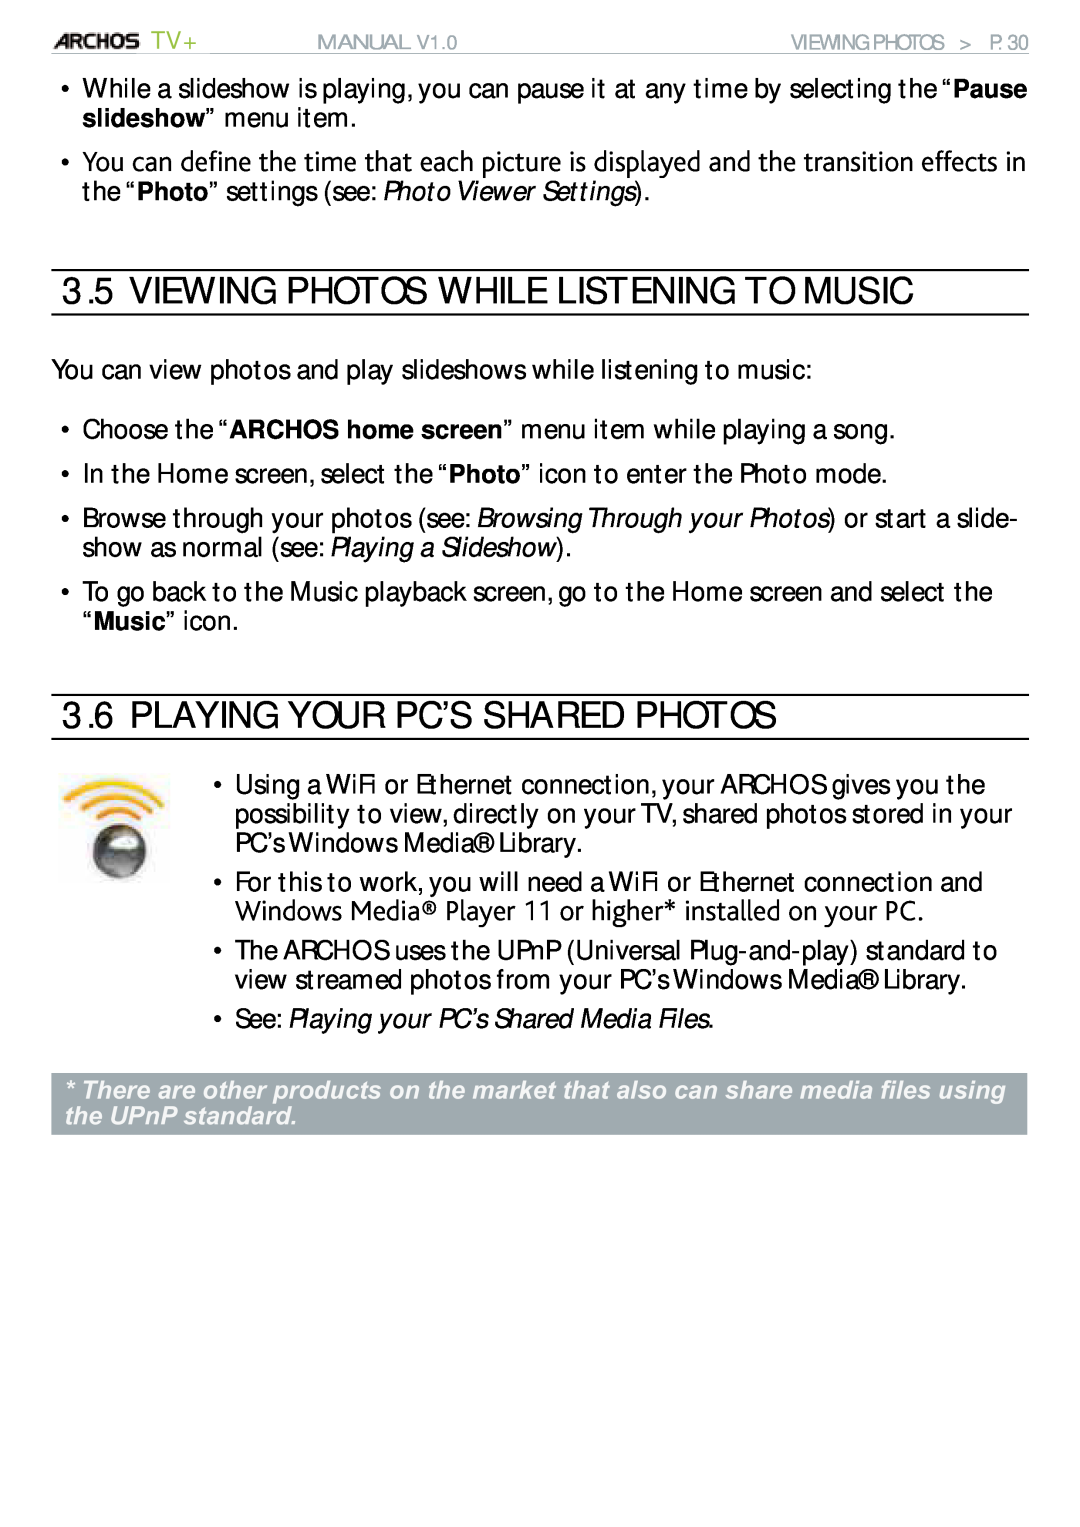 Archos 500973 user manual Viewing Photos While Listening To Music, Playing Your Pc’S Shared Photos 